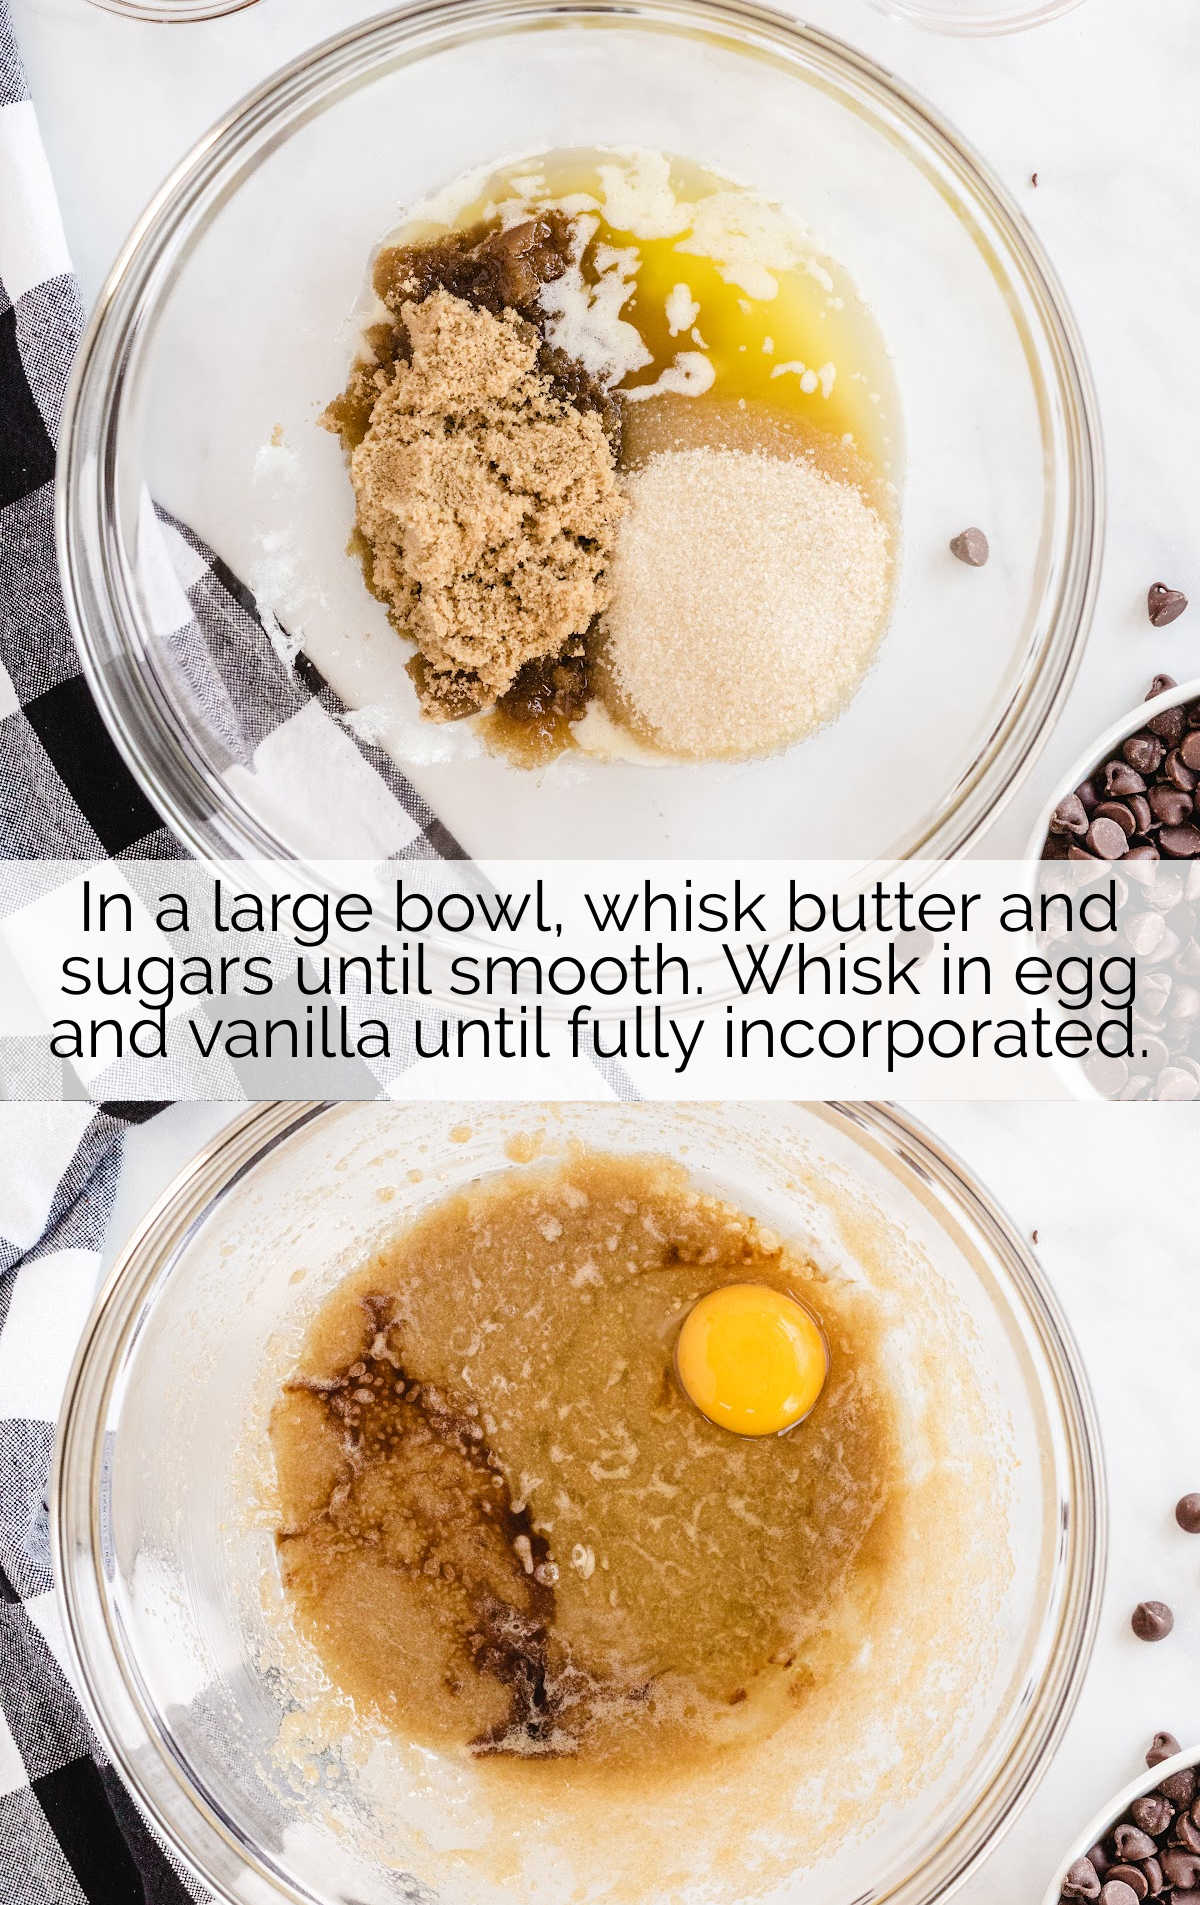 butter, sugar, egg, and vanilla whisk in a bowl